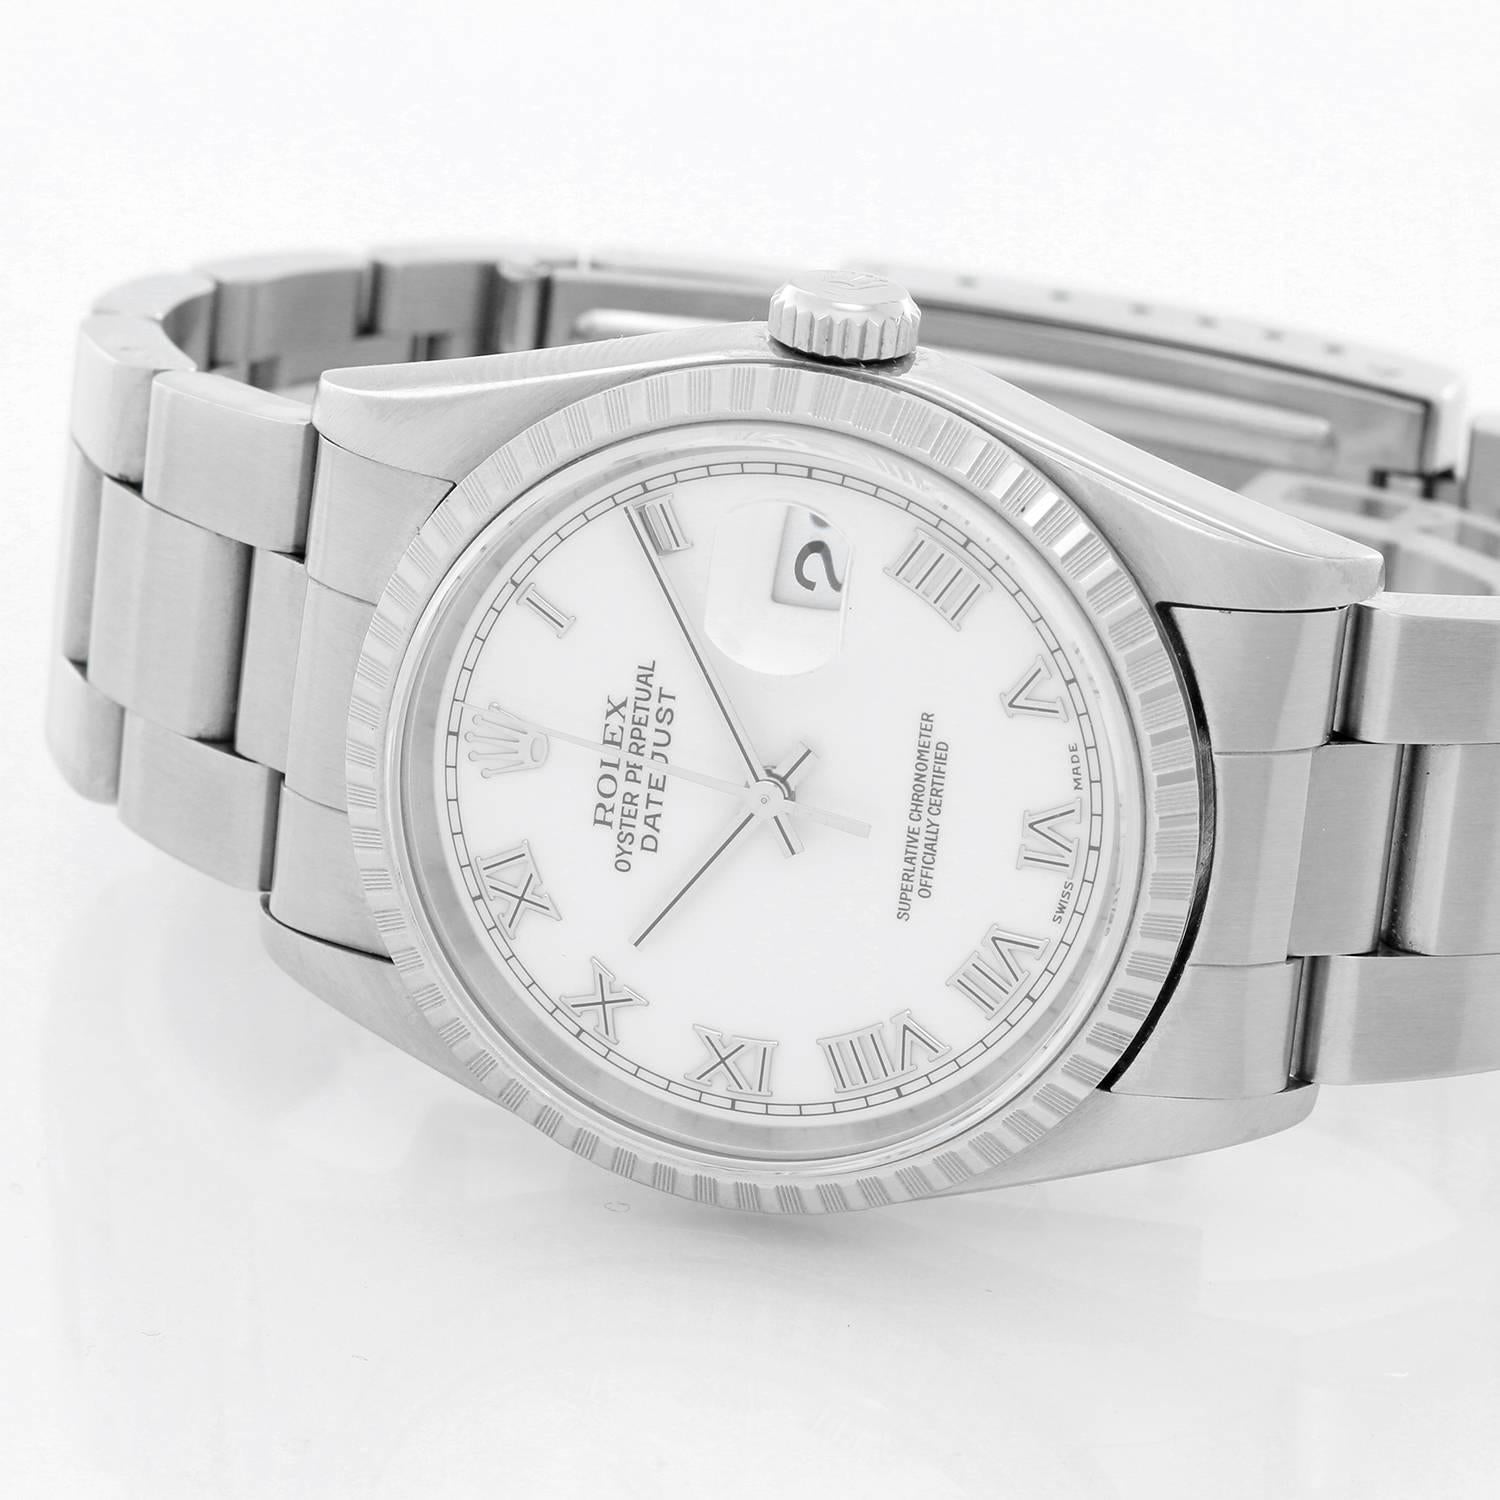 Rolex Datejust Men's Stainless Steel Watch 16220 -  Automatic winding, 31 jewels, Quickset, sapphire crystal. Stainless steel case with Engine-turned bezel (36mm diameter). White dial with Roman numerals. Stainless steel Oyster bracelet. Pre-owned